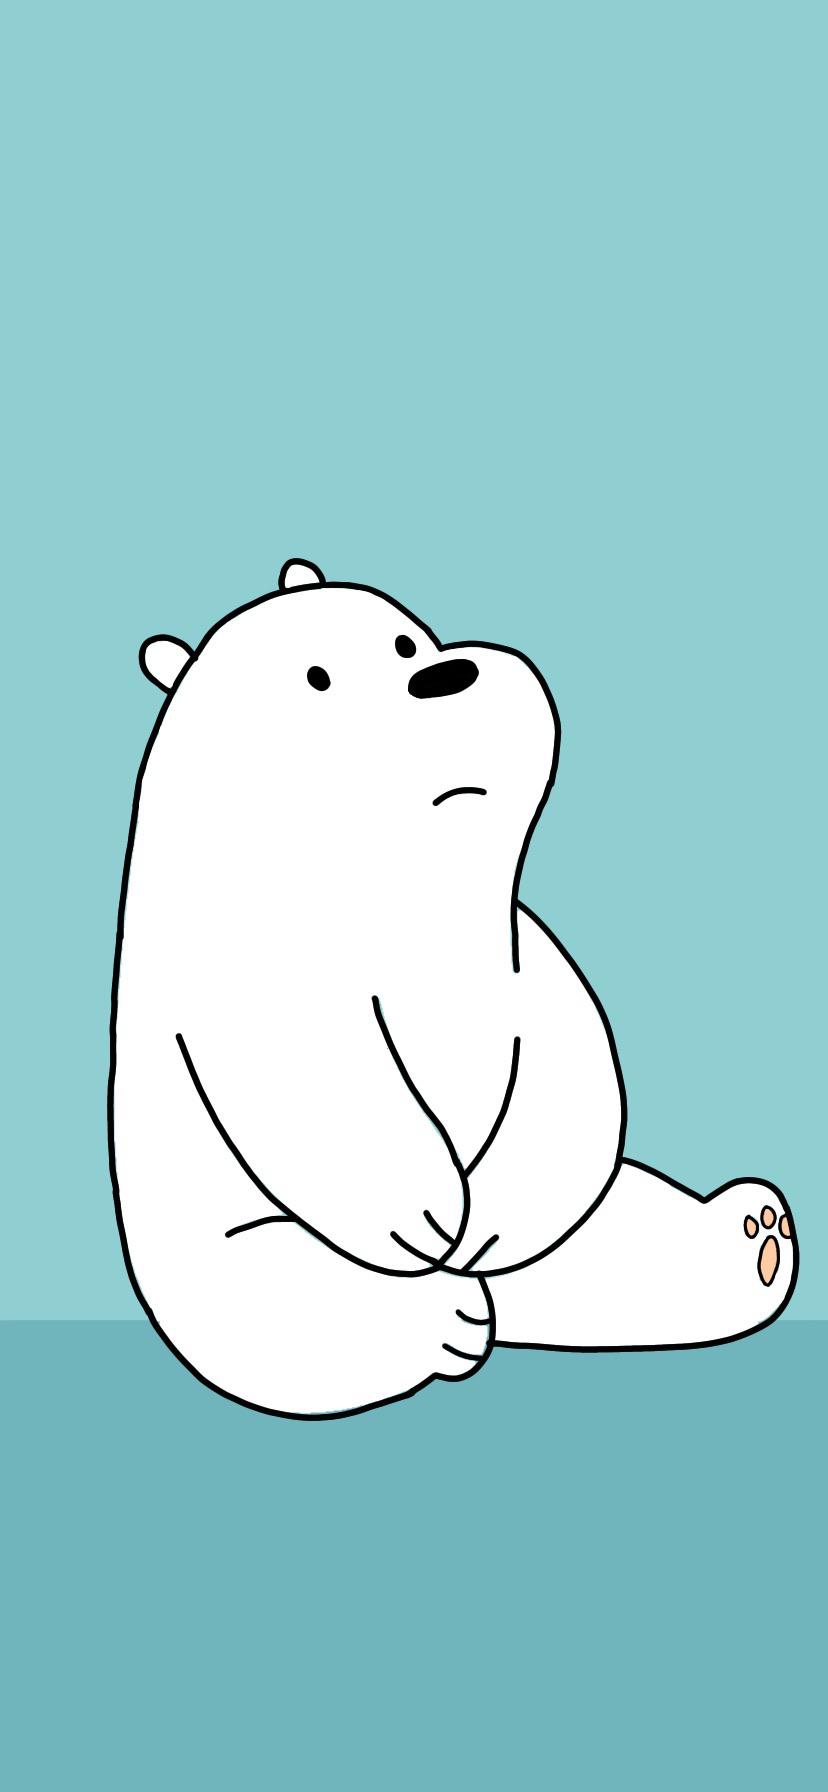 Ice bear wallpaper for iPhone 11